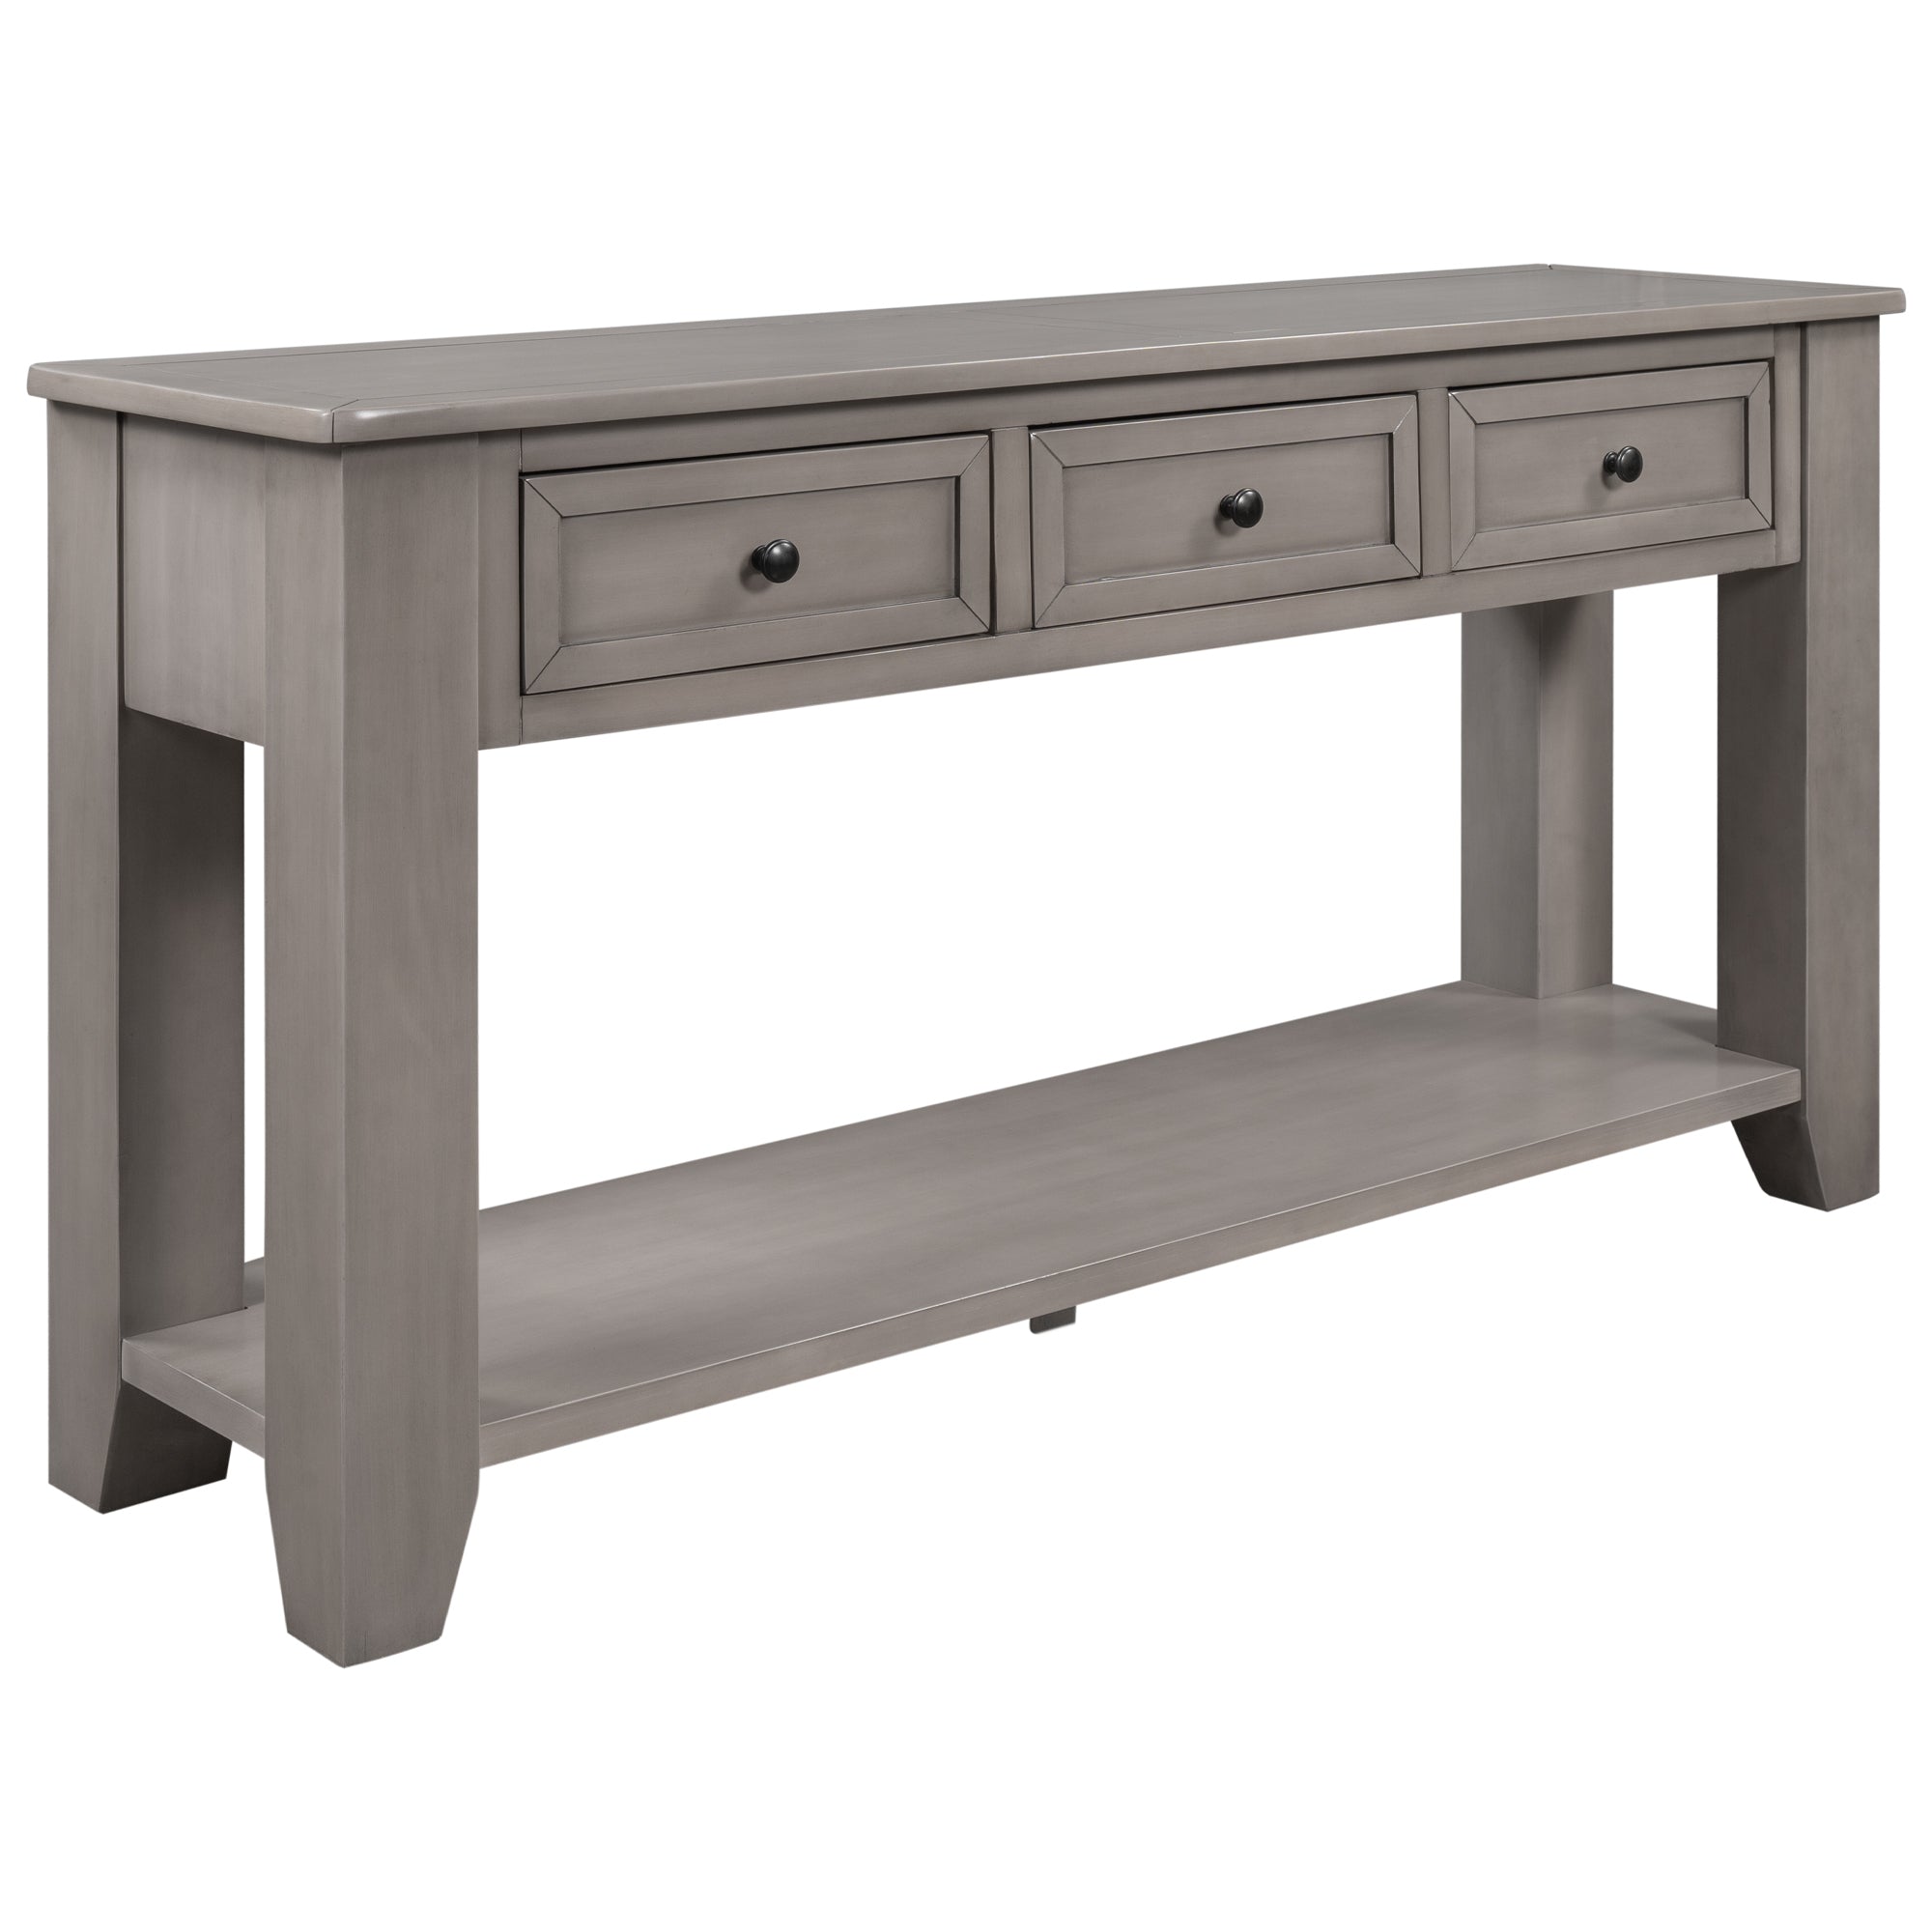 55'' Modern Console Table Sofa Table for Living Room with 3 Drawers and 1 Shelf (Gray)